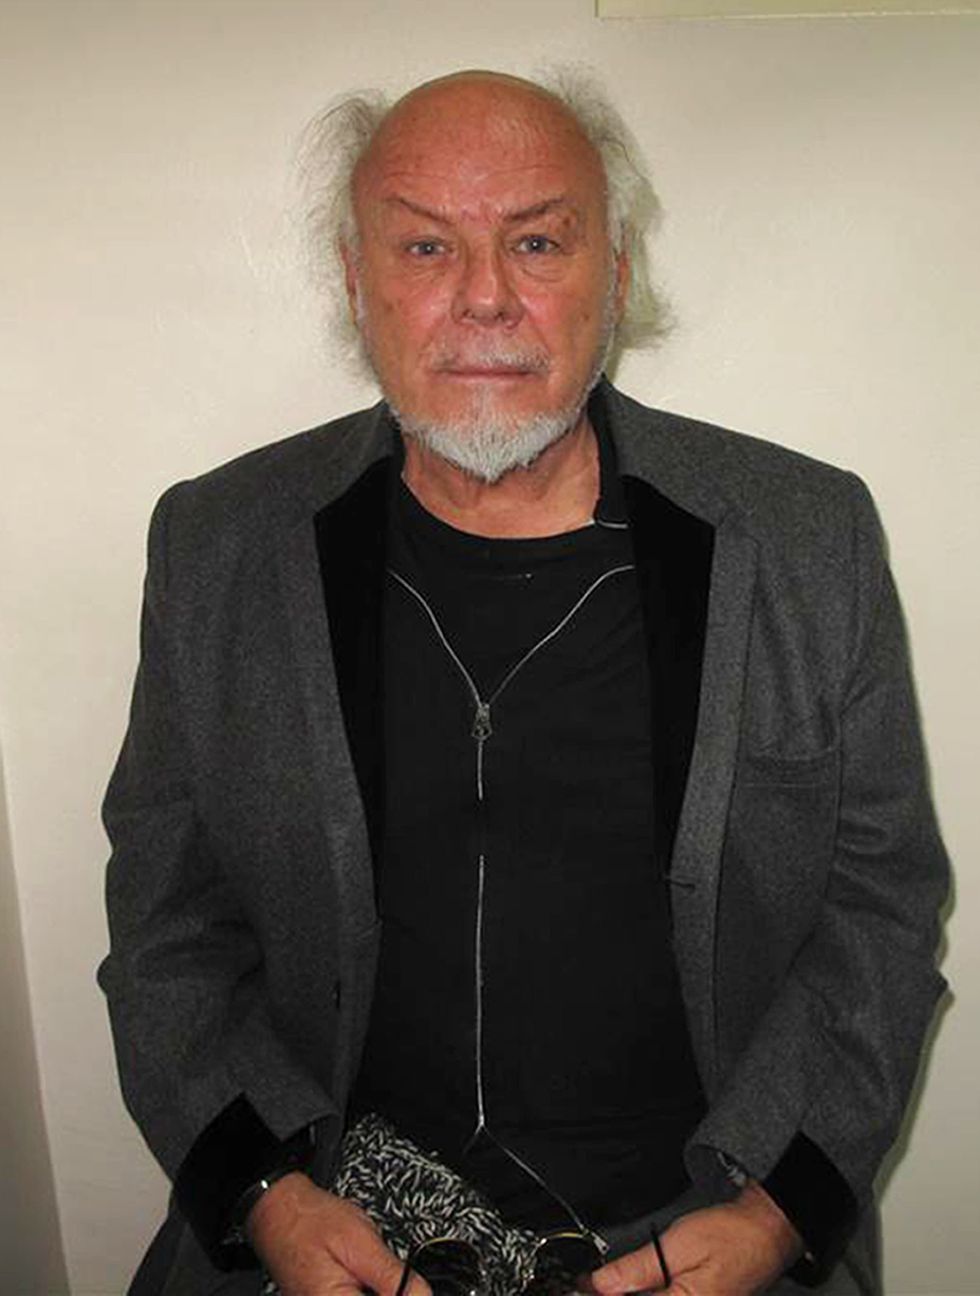 Paedophile pop star Gary Glitter will be released from prison early next year, according to a report.